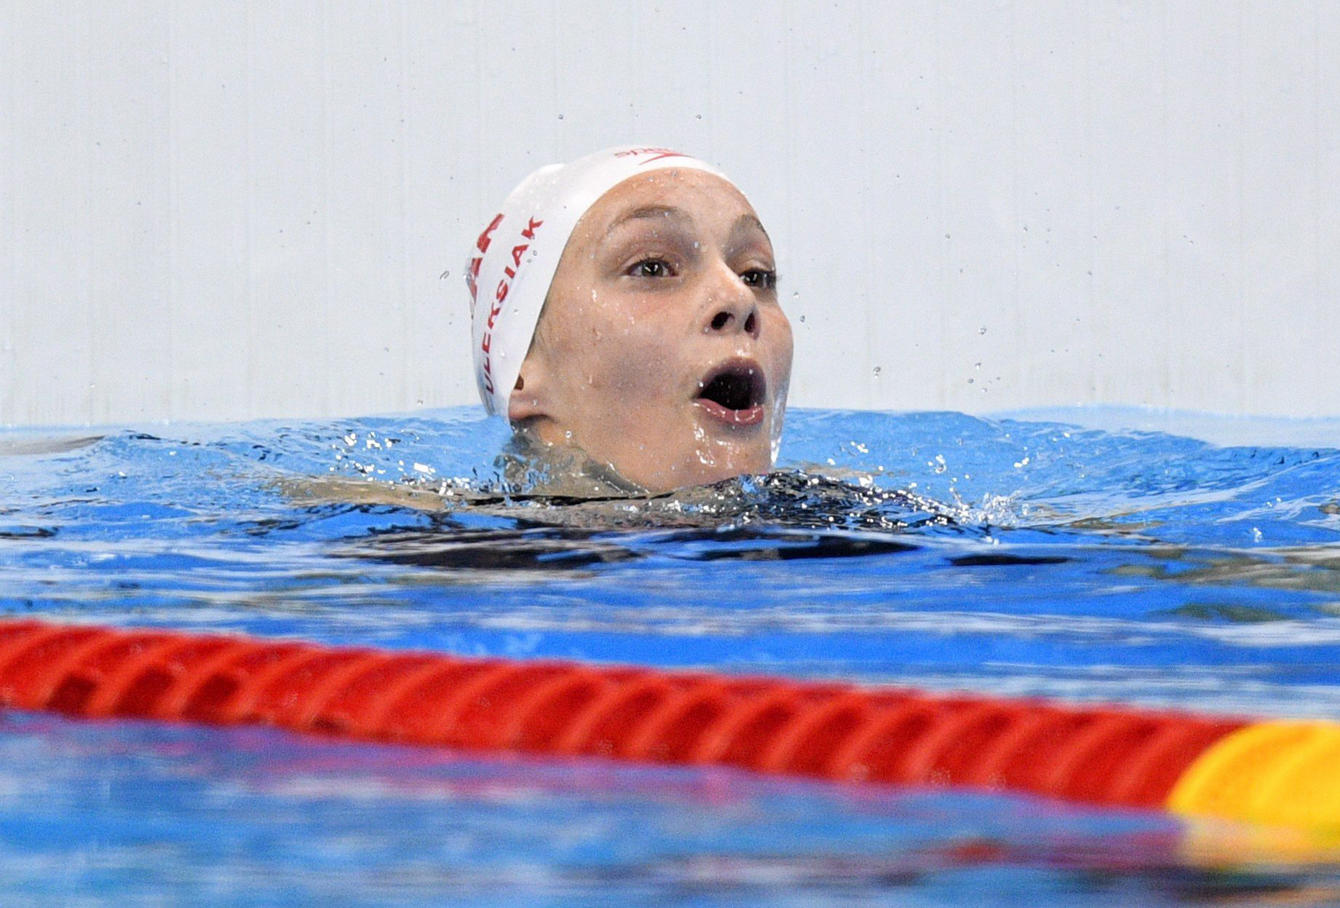 Canada's Penny Oleksiak reacts to her gold medal finish in the women's 100m freestyle finals during the 2016 Olympic Summer Games in Rio de Janeiro, Brazil, on Thursday, Aug. 11, 2016. THE CANADIAN PRESS/Sean Kilpatrick